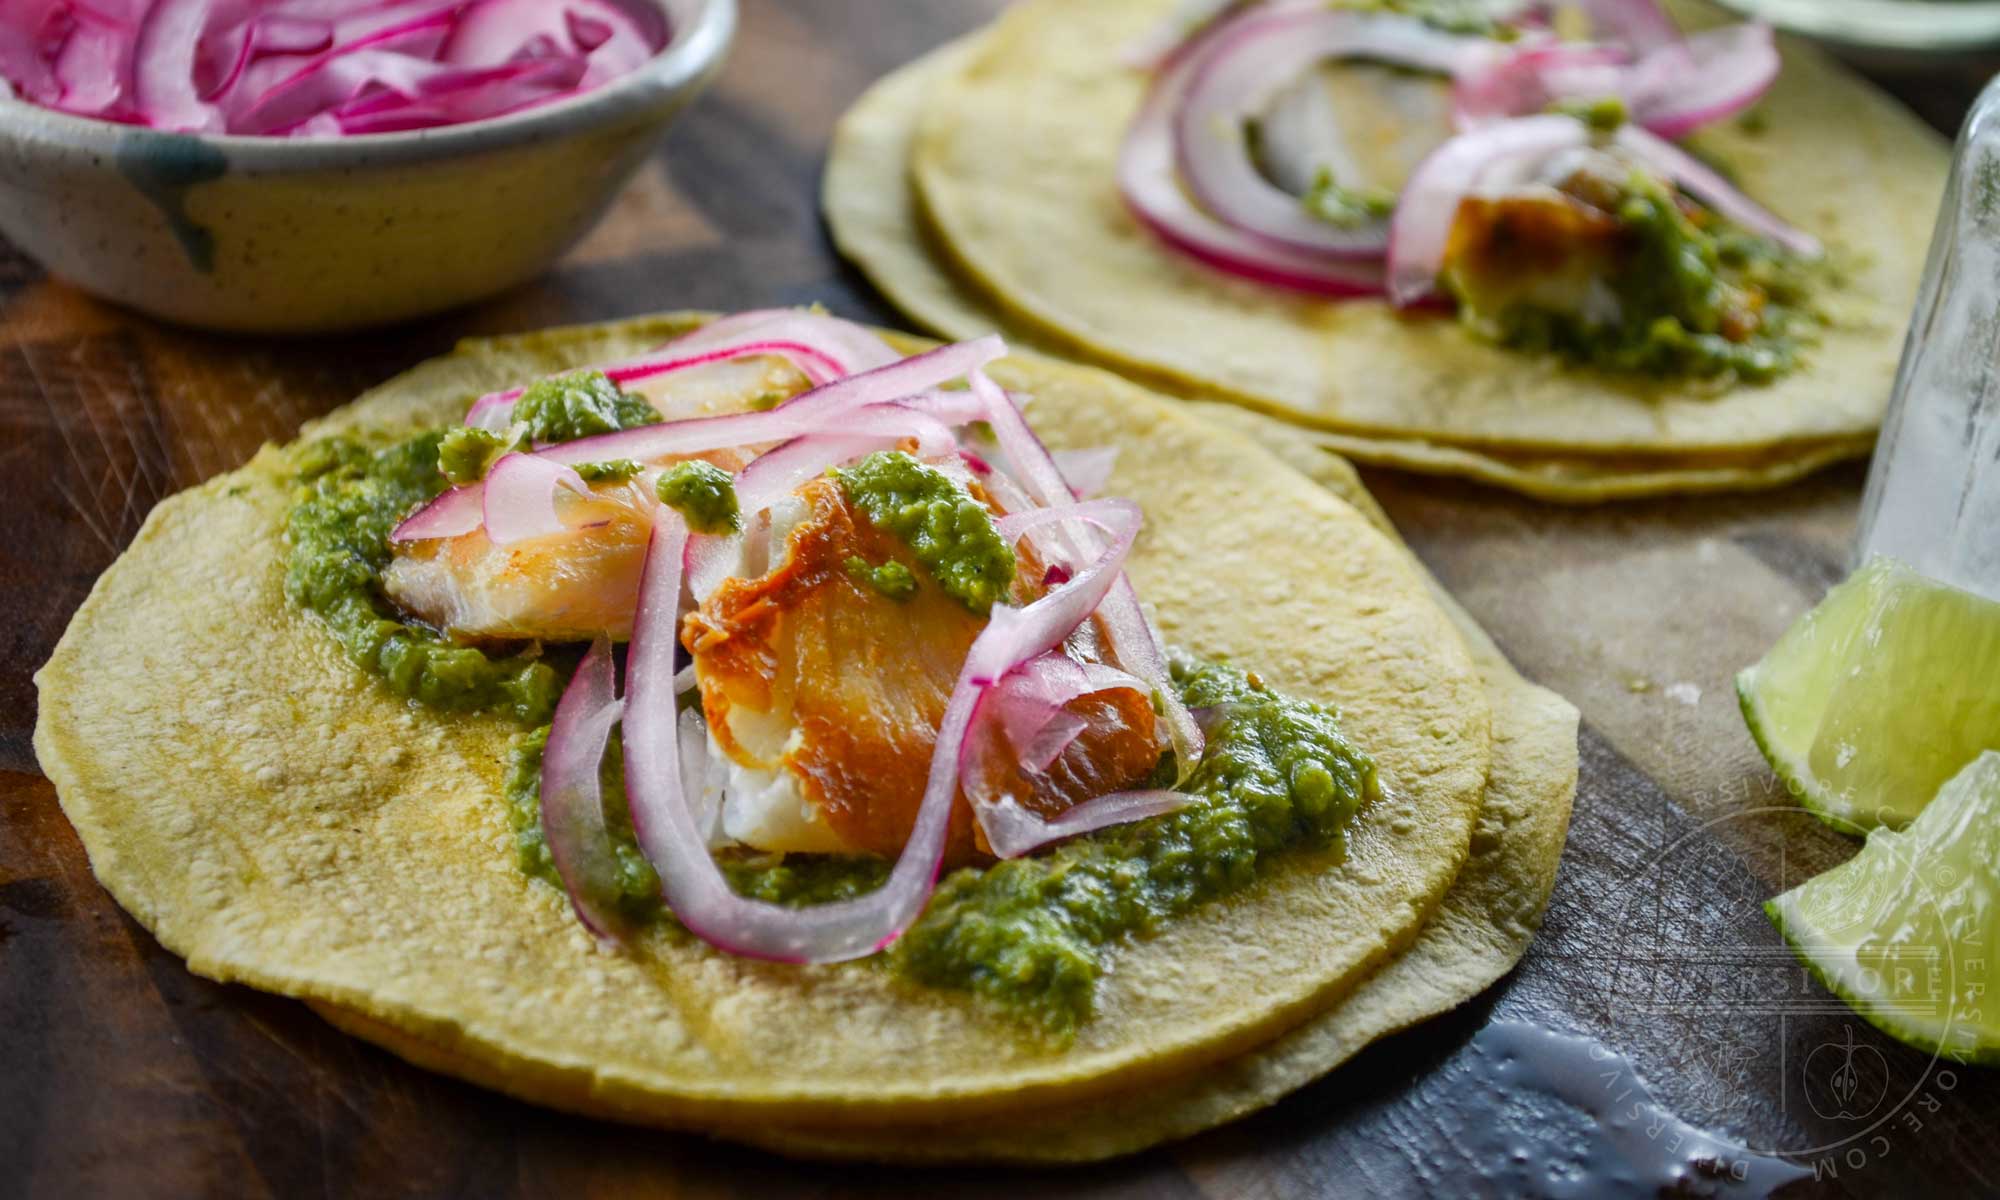 Fish tacos with cilantro corn salsa and pickled red onions